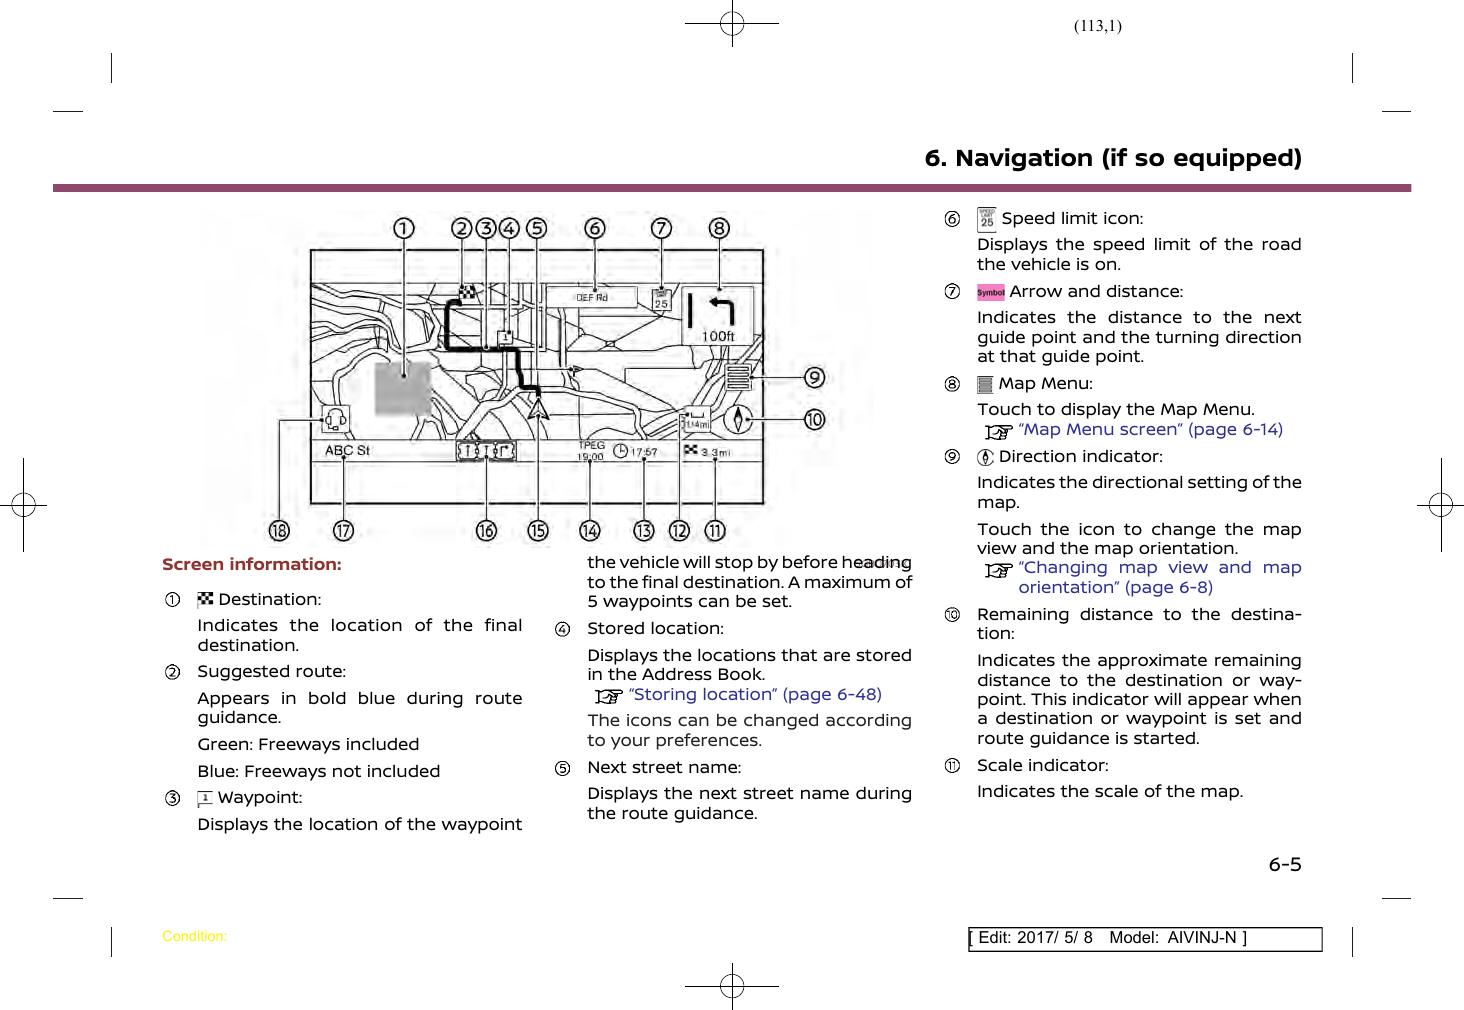 Page 113 of Robert Bosch Car Multimedia AIVICMFB0 Navigation System with Bluetooth and WLAN User Manual